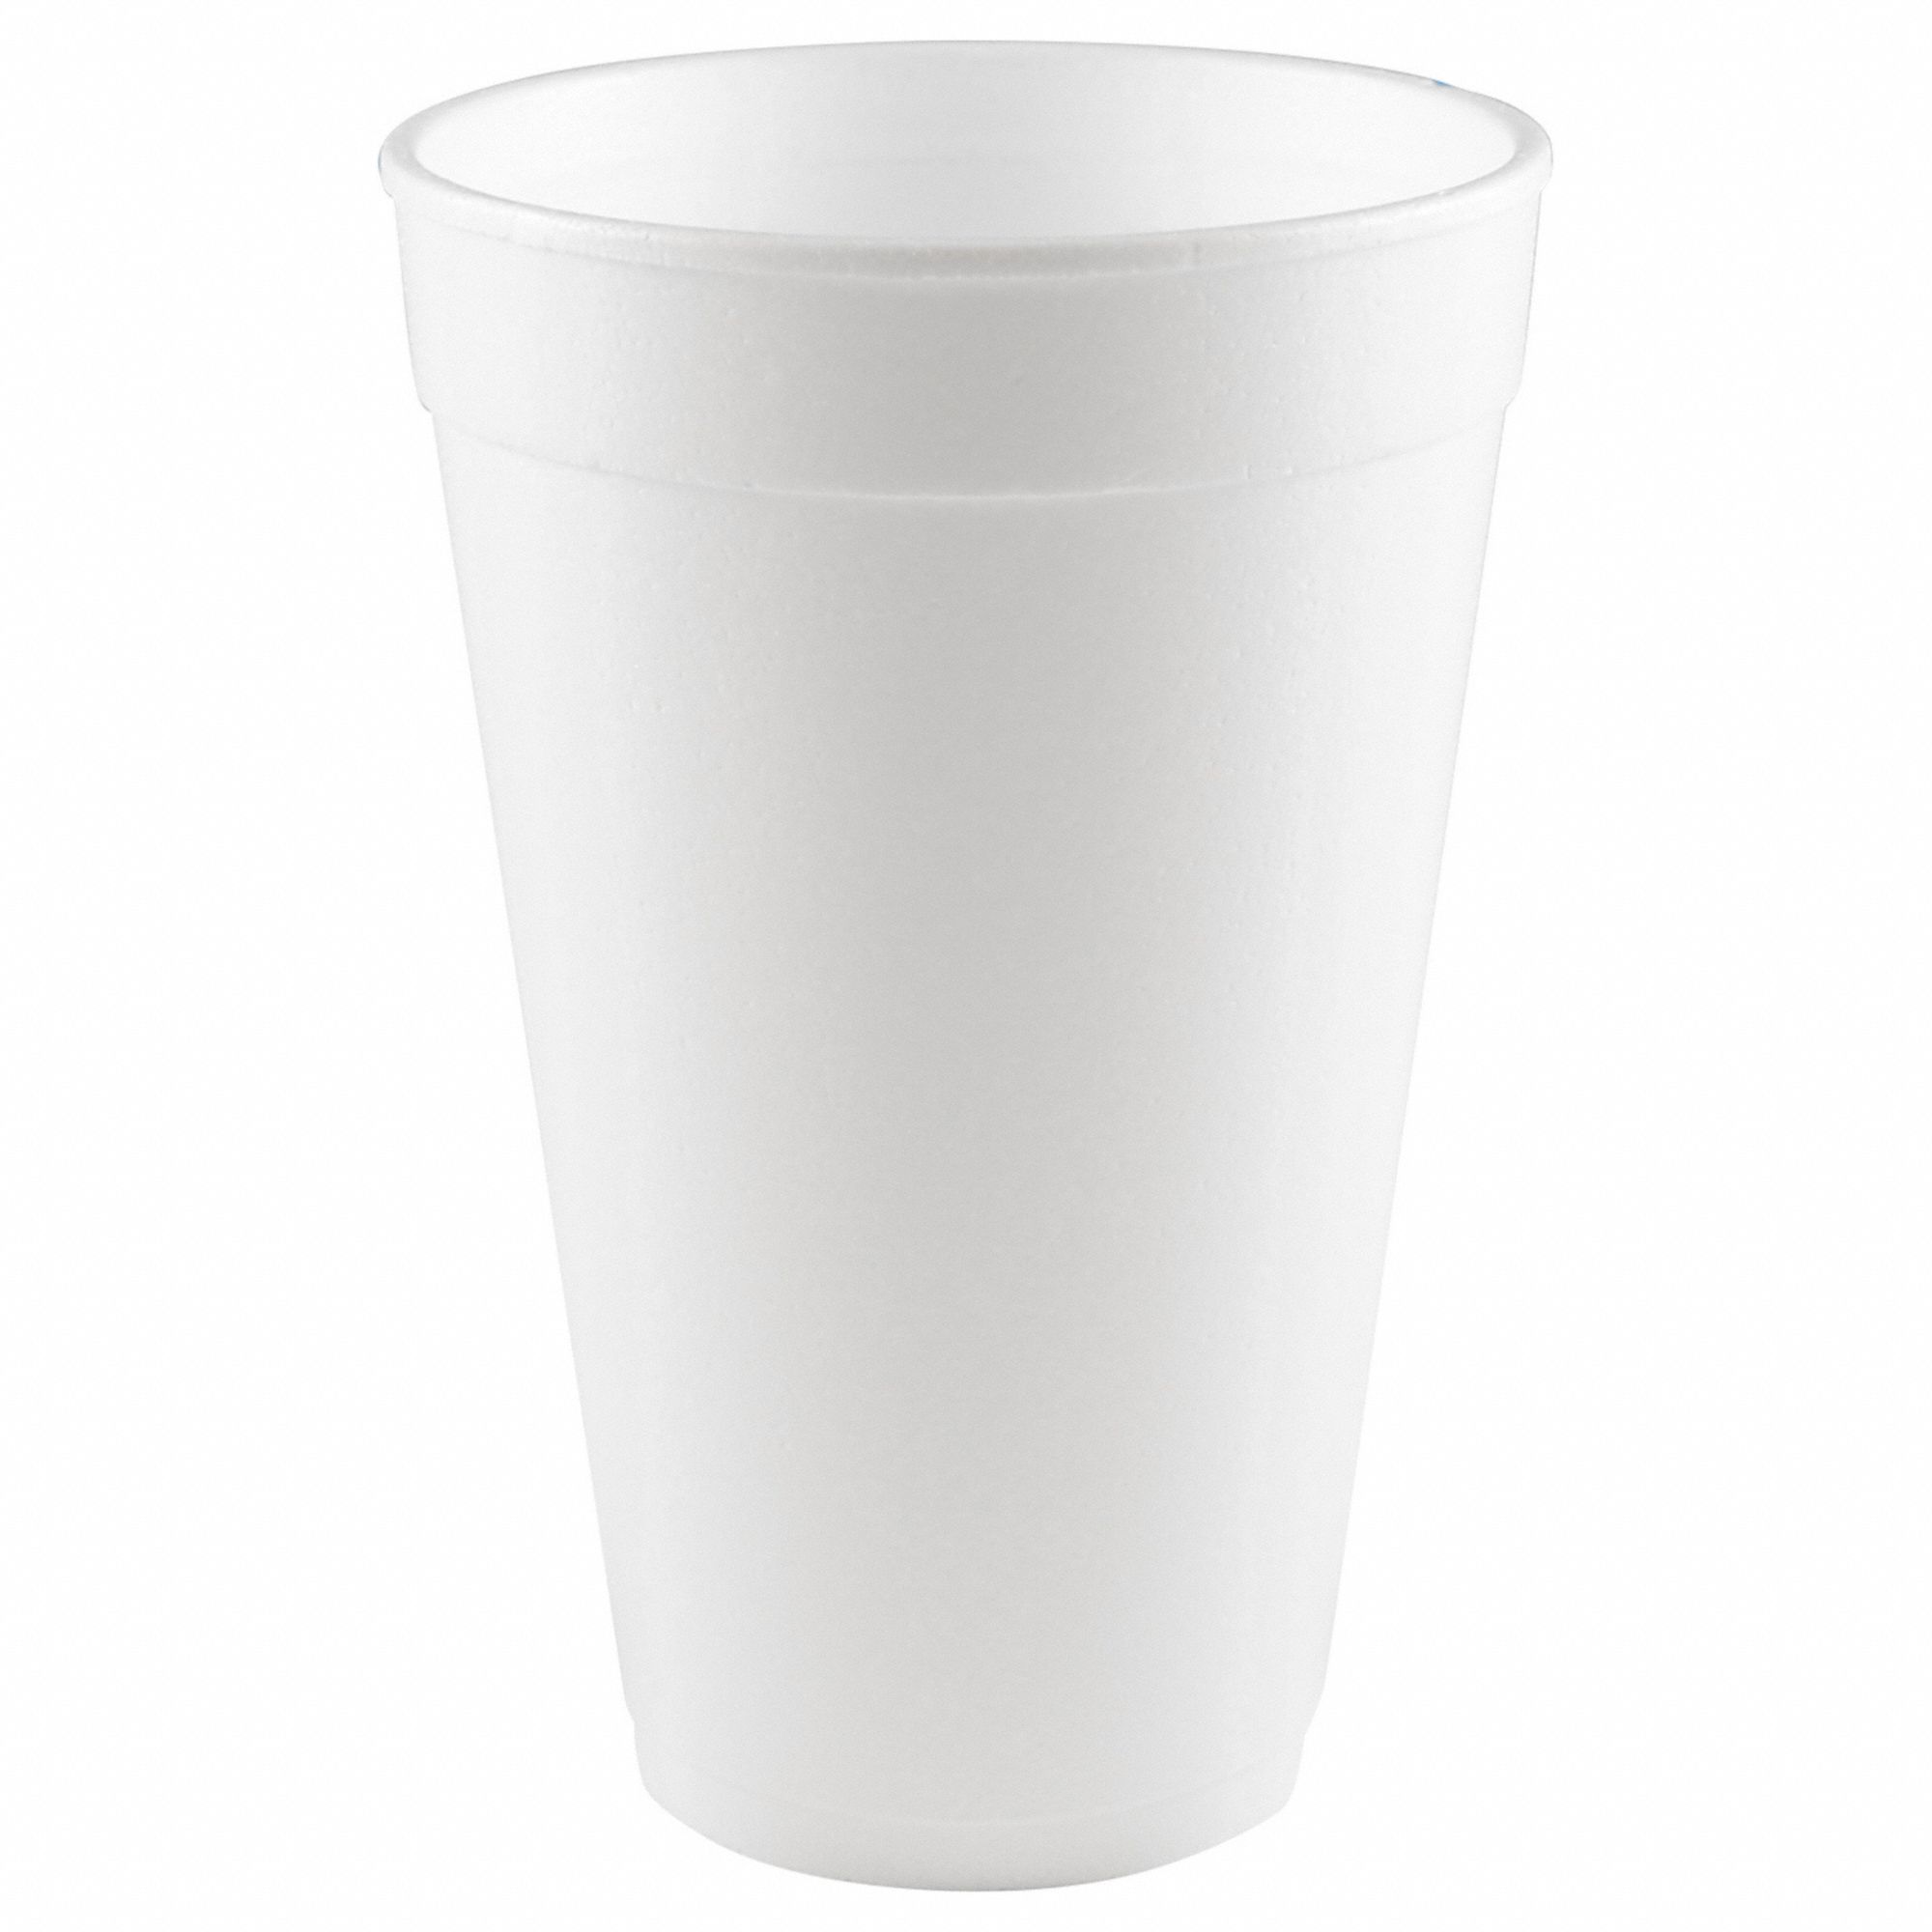 16 oz Capacity, White, Disposable Hot/Cold Cup - 6GEC2